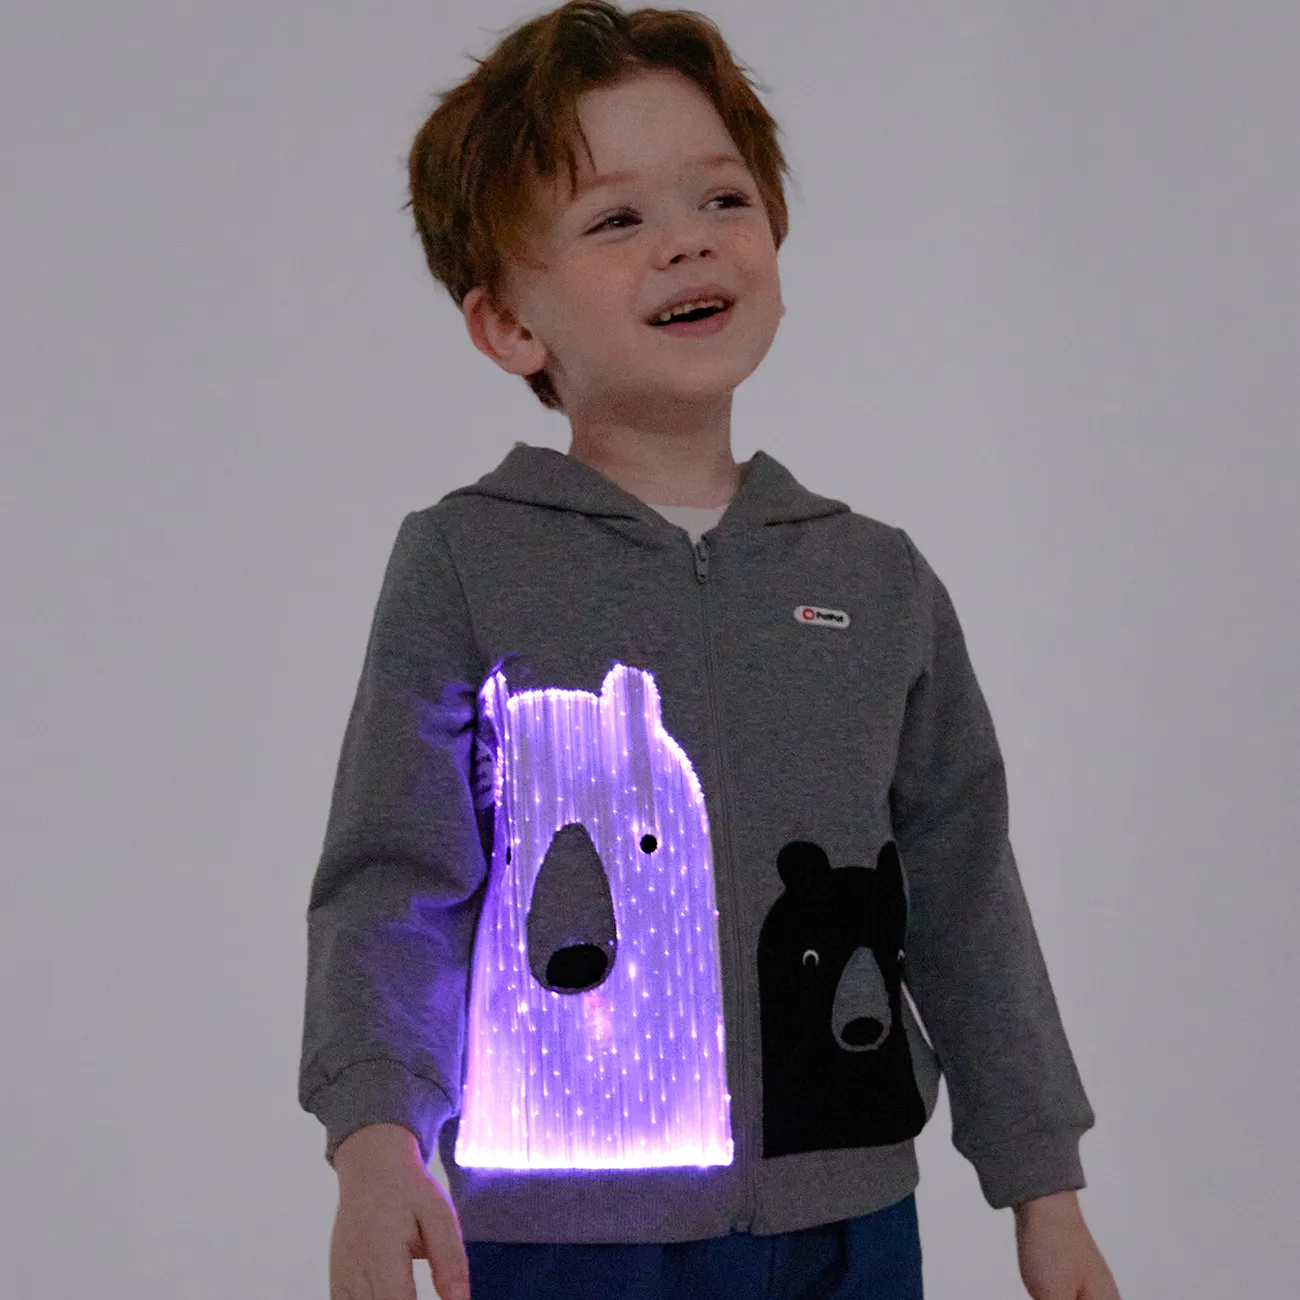 Go-Glow Illuminating Jacket with Light Up White Bear Including Controller (Built-In Battery) Grey big image 1